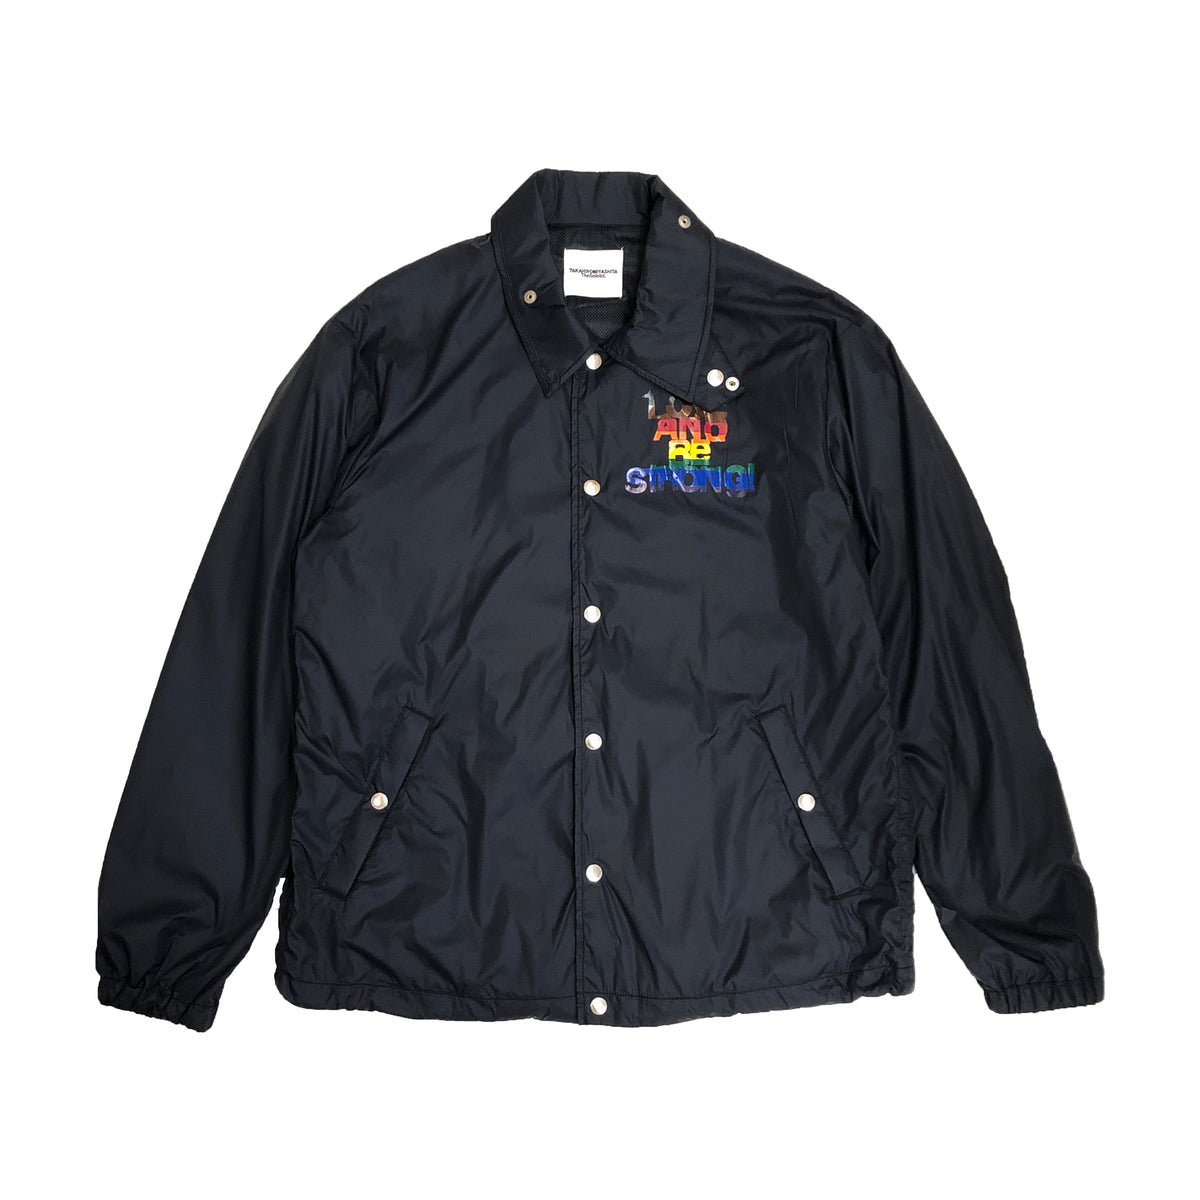 THE SOLOIST. LOVE AND BE STRONG COACH JACKET